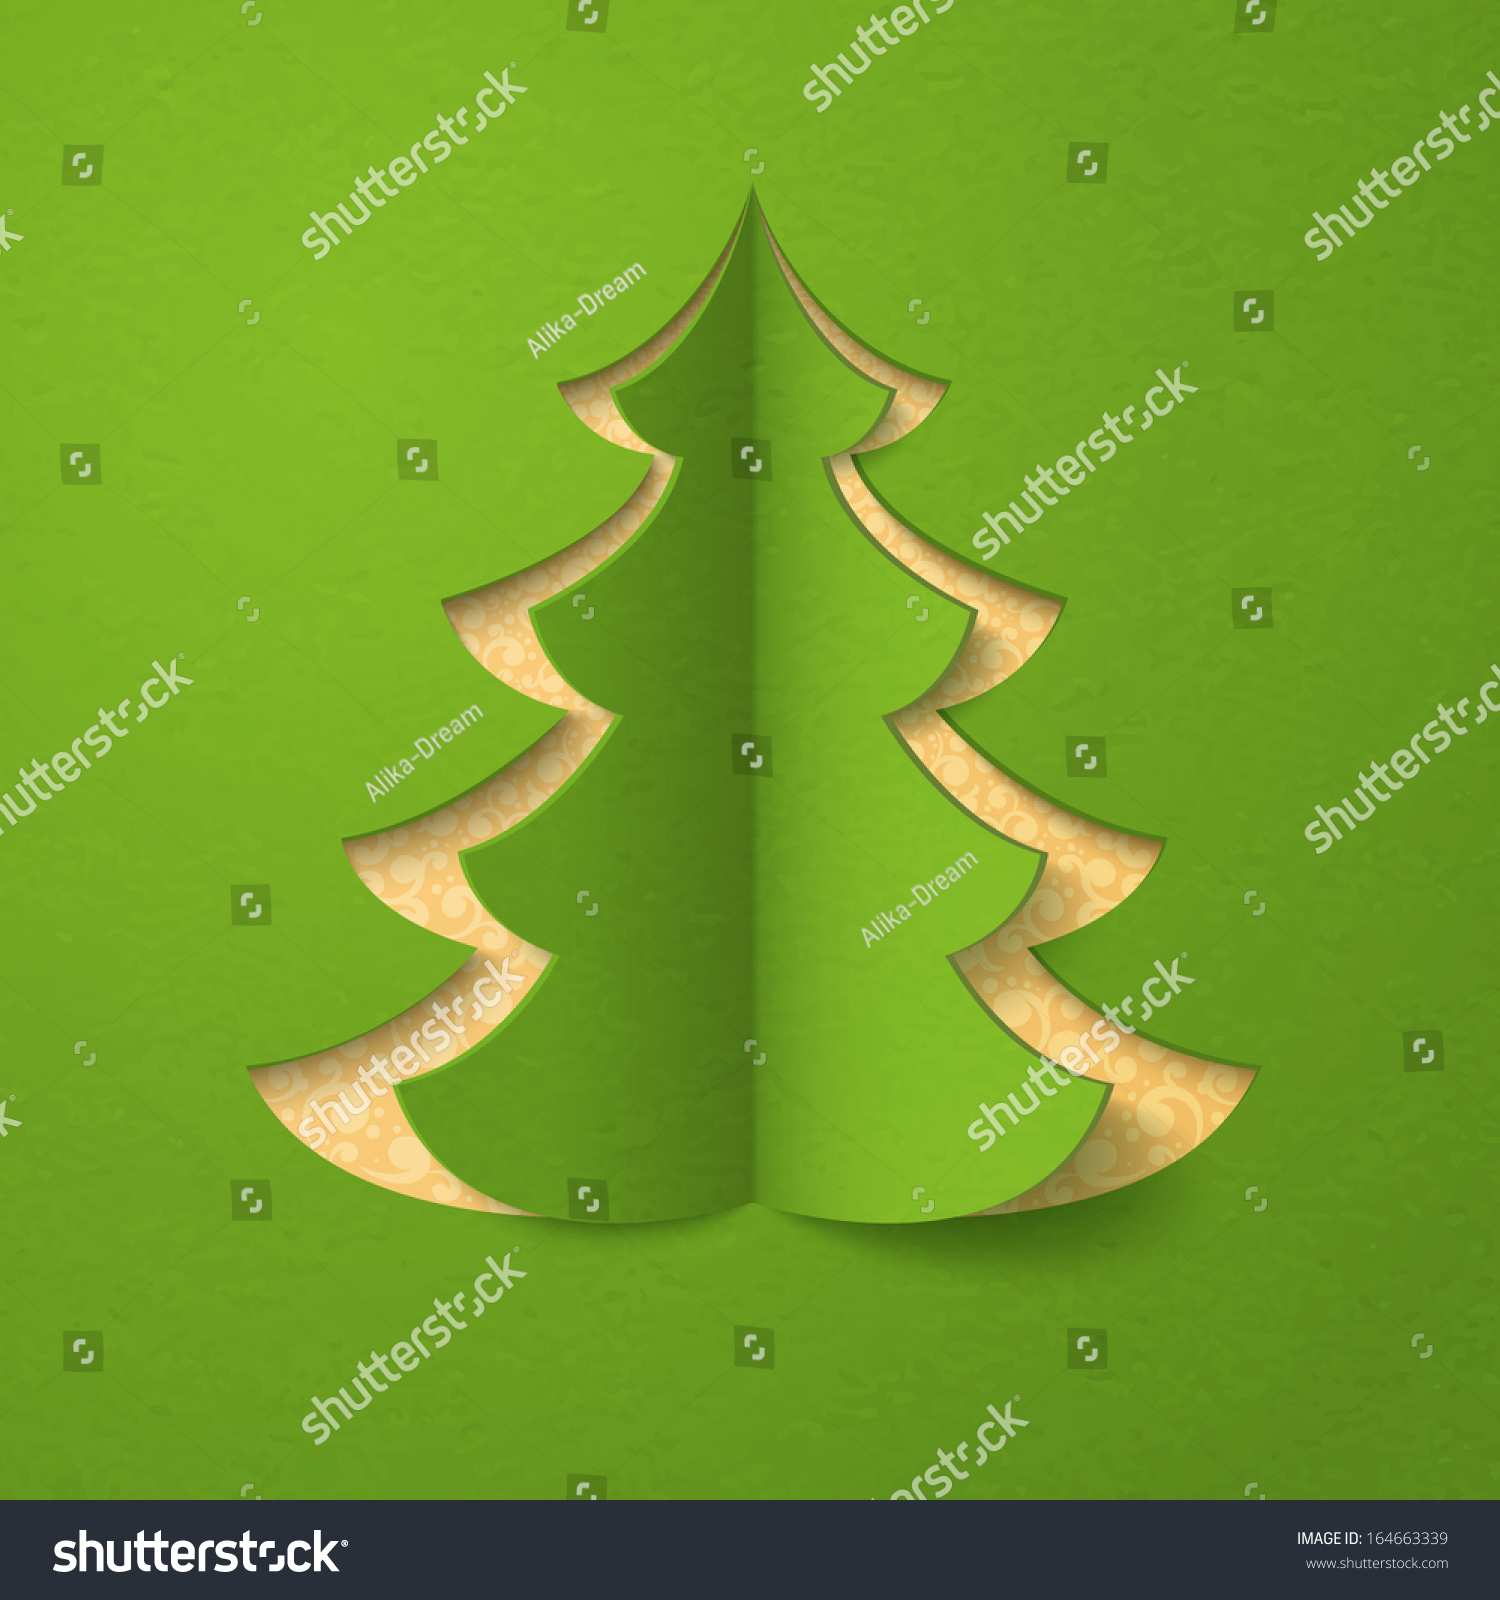 Christmas Tree Cut Out Green Paper Stock Vector 164663339 - Shutterstock